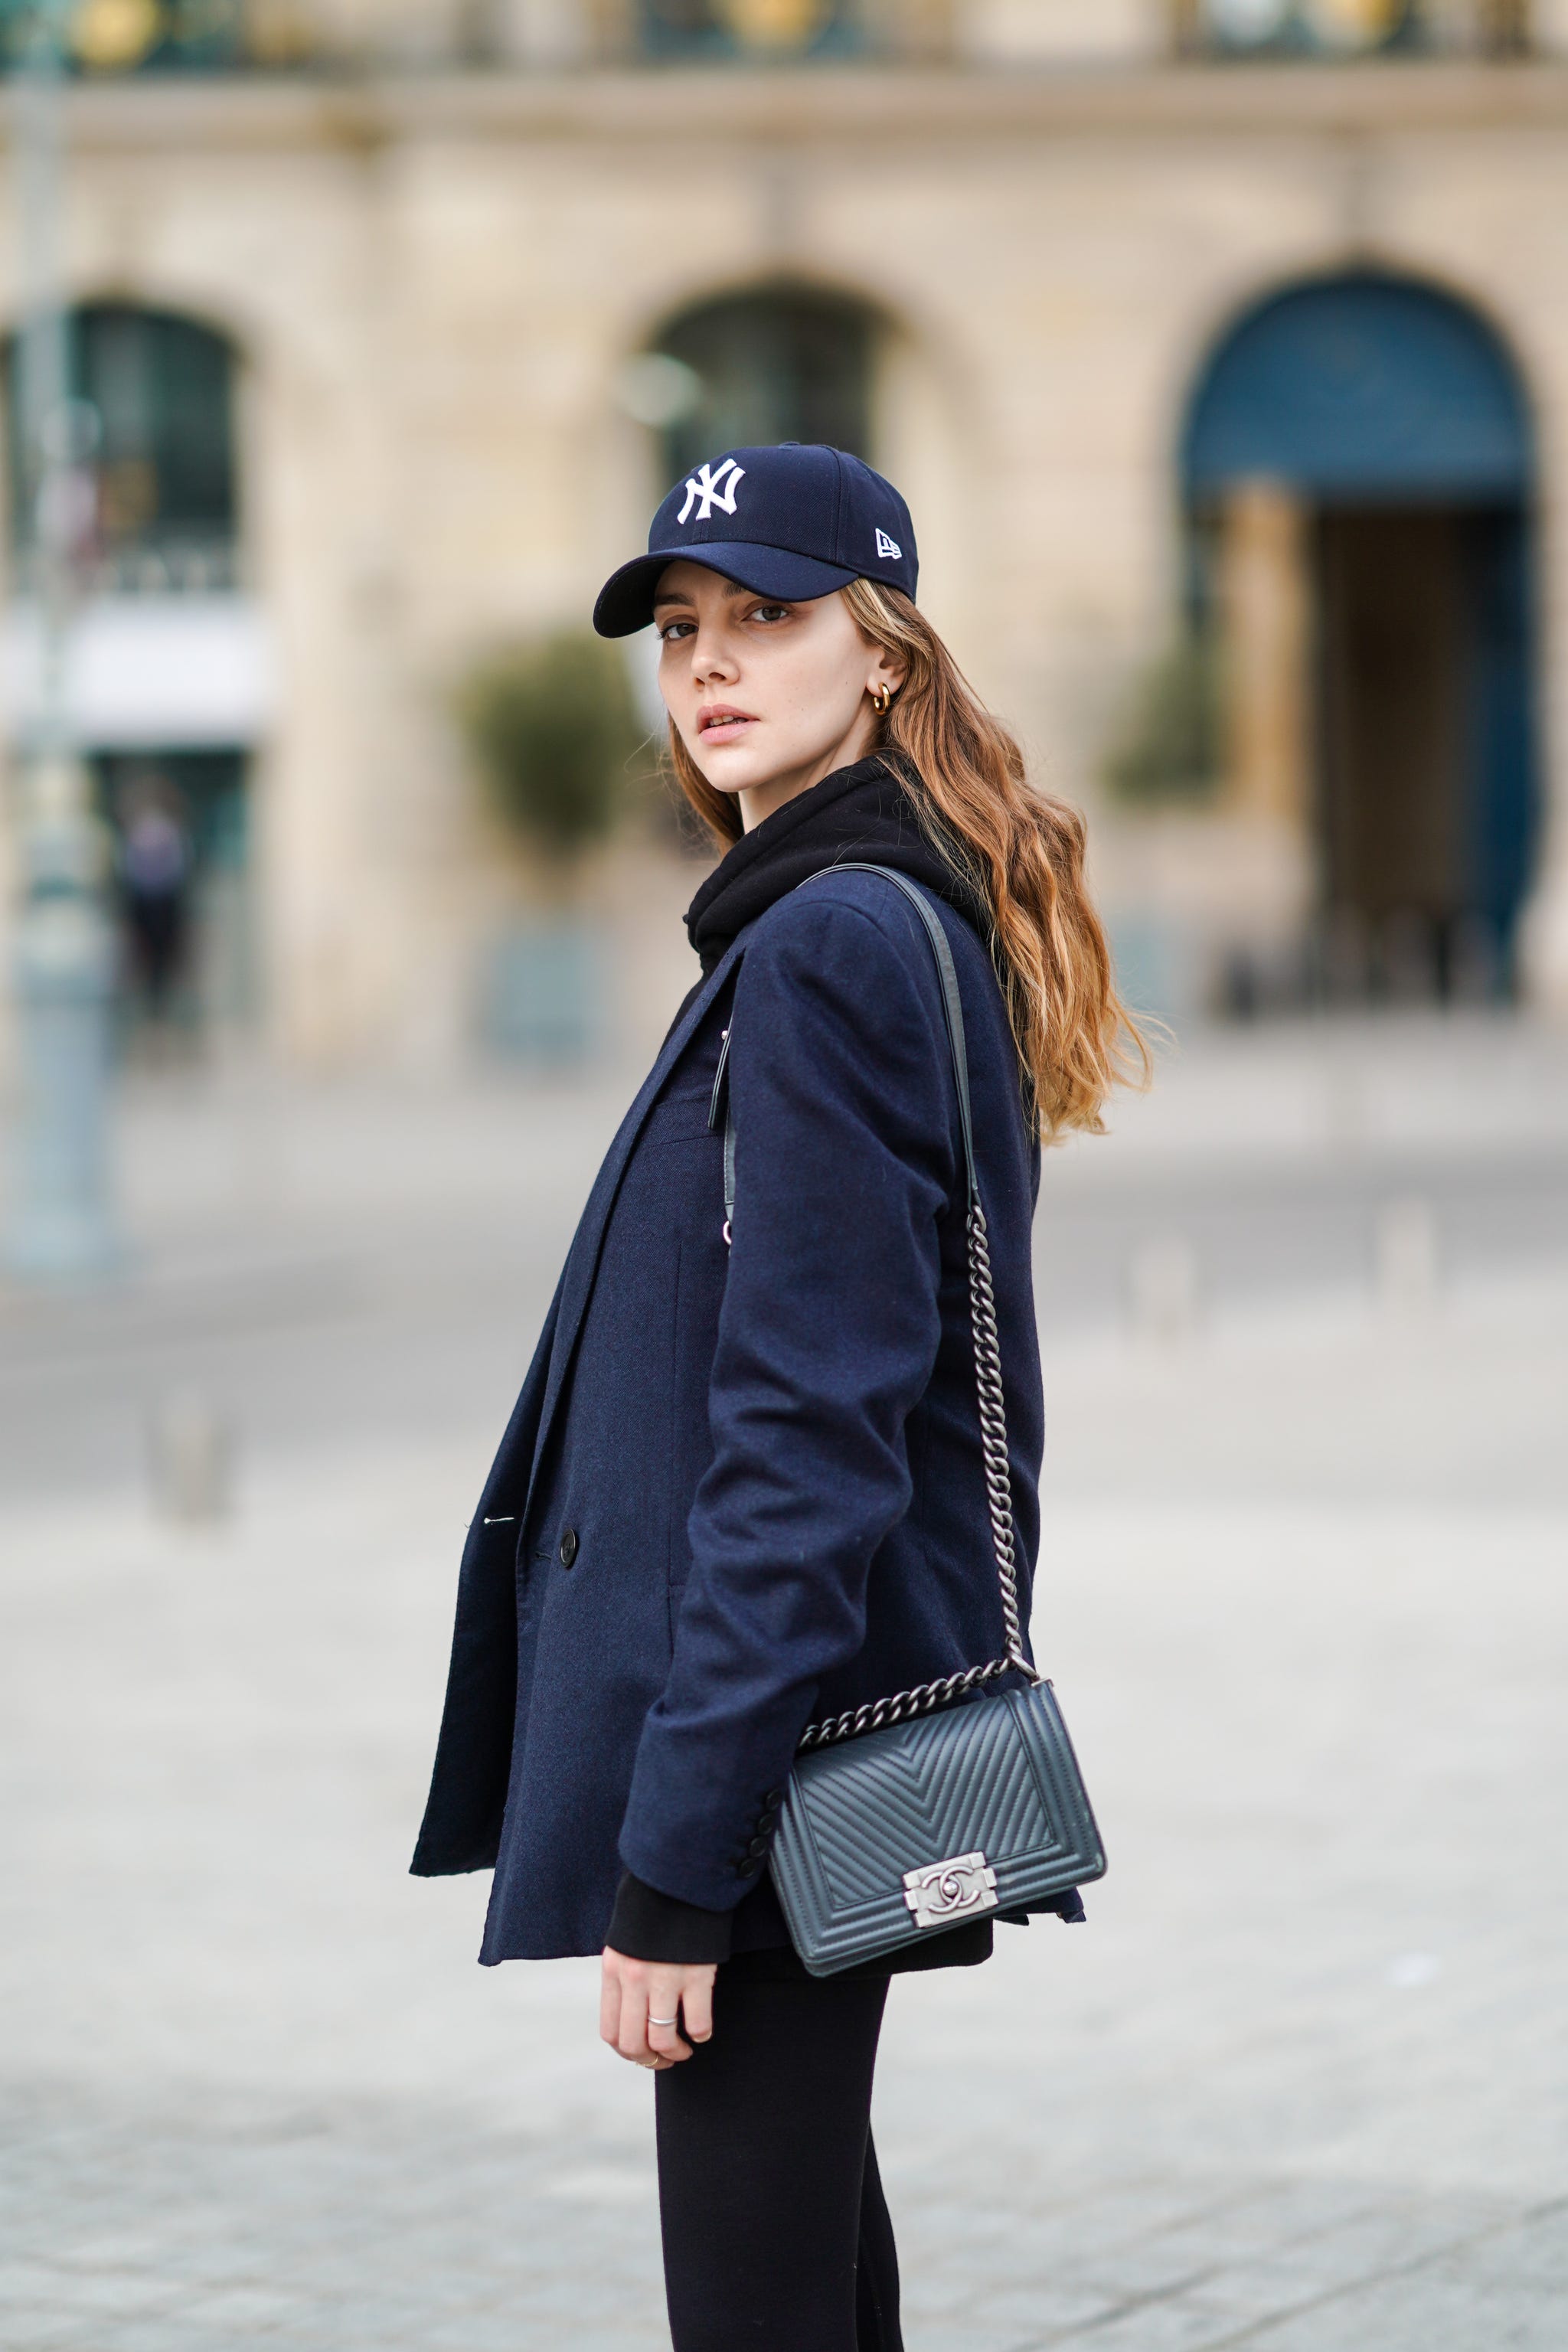 paris, france   march 03 olesya senchenko wears a ny blue cap hat, a black hoodie sweater, a navy blue blazer jacket, a black leather quilted chanel bag, black leggings, on march 03, 2021 in paris, france photo by edward berthelotgetty images